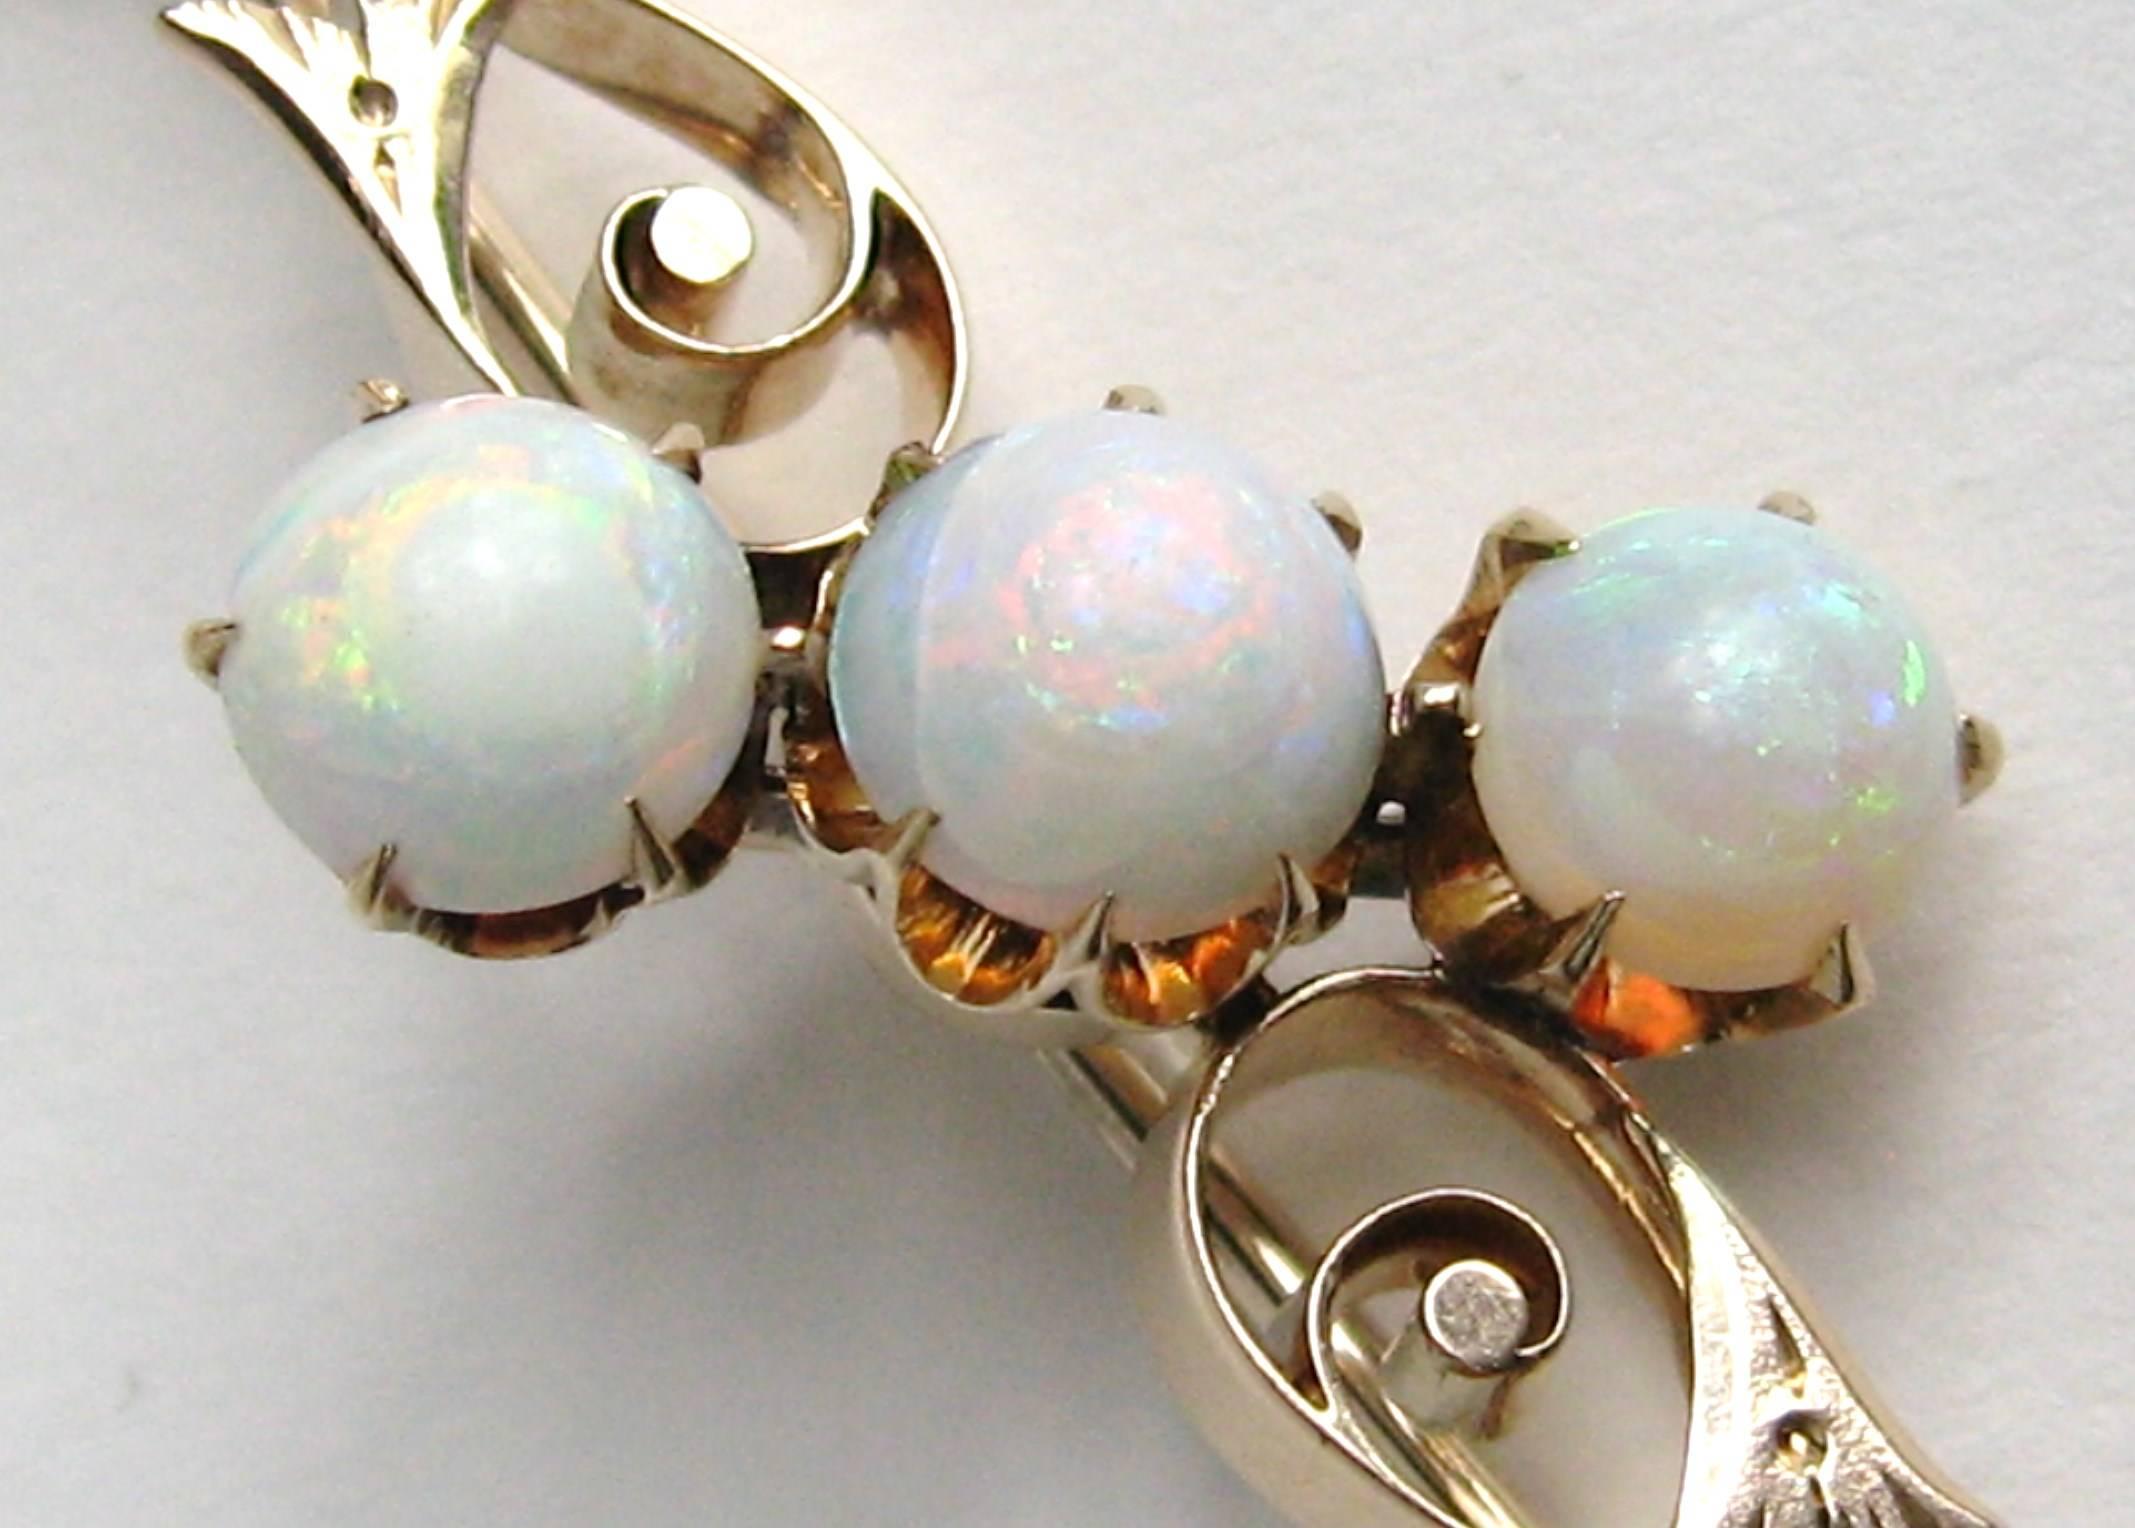 Stunning 10K Rose Gold 3 Opal Brooch. Measuring 1.97 inches wide x .60 top to bottom measuring opals.  Opals are claw set, 3 in total. Early C-style closure. This is out of a massive collection of Contemporary designer clothing as well as Hopi,